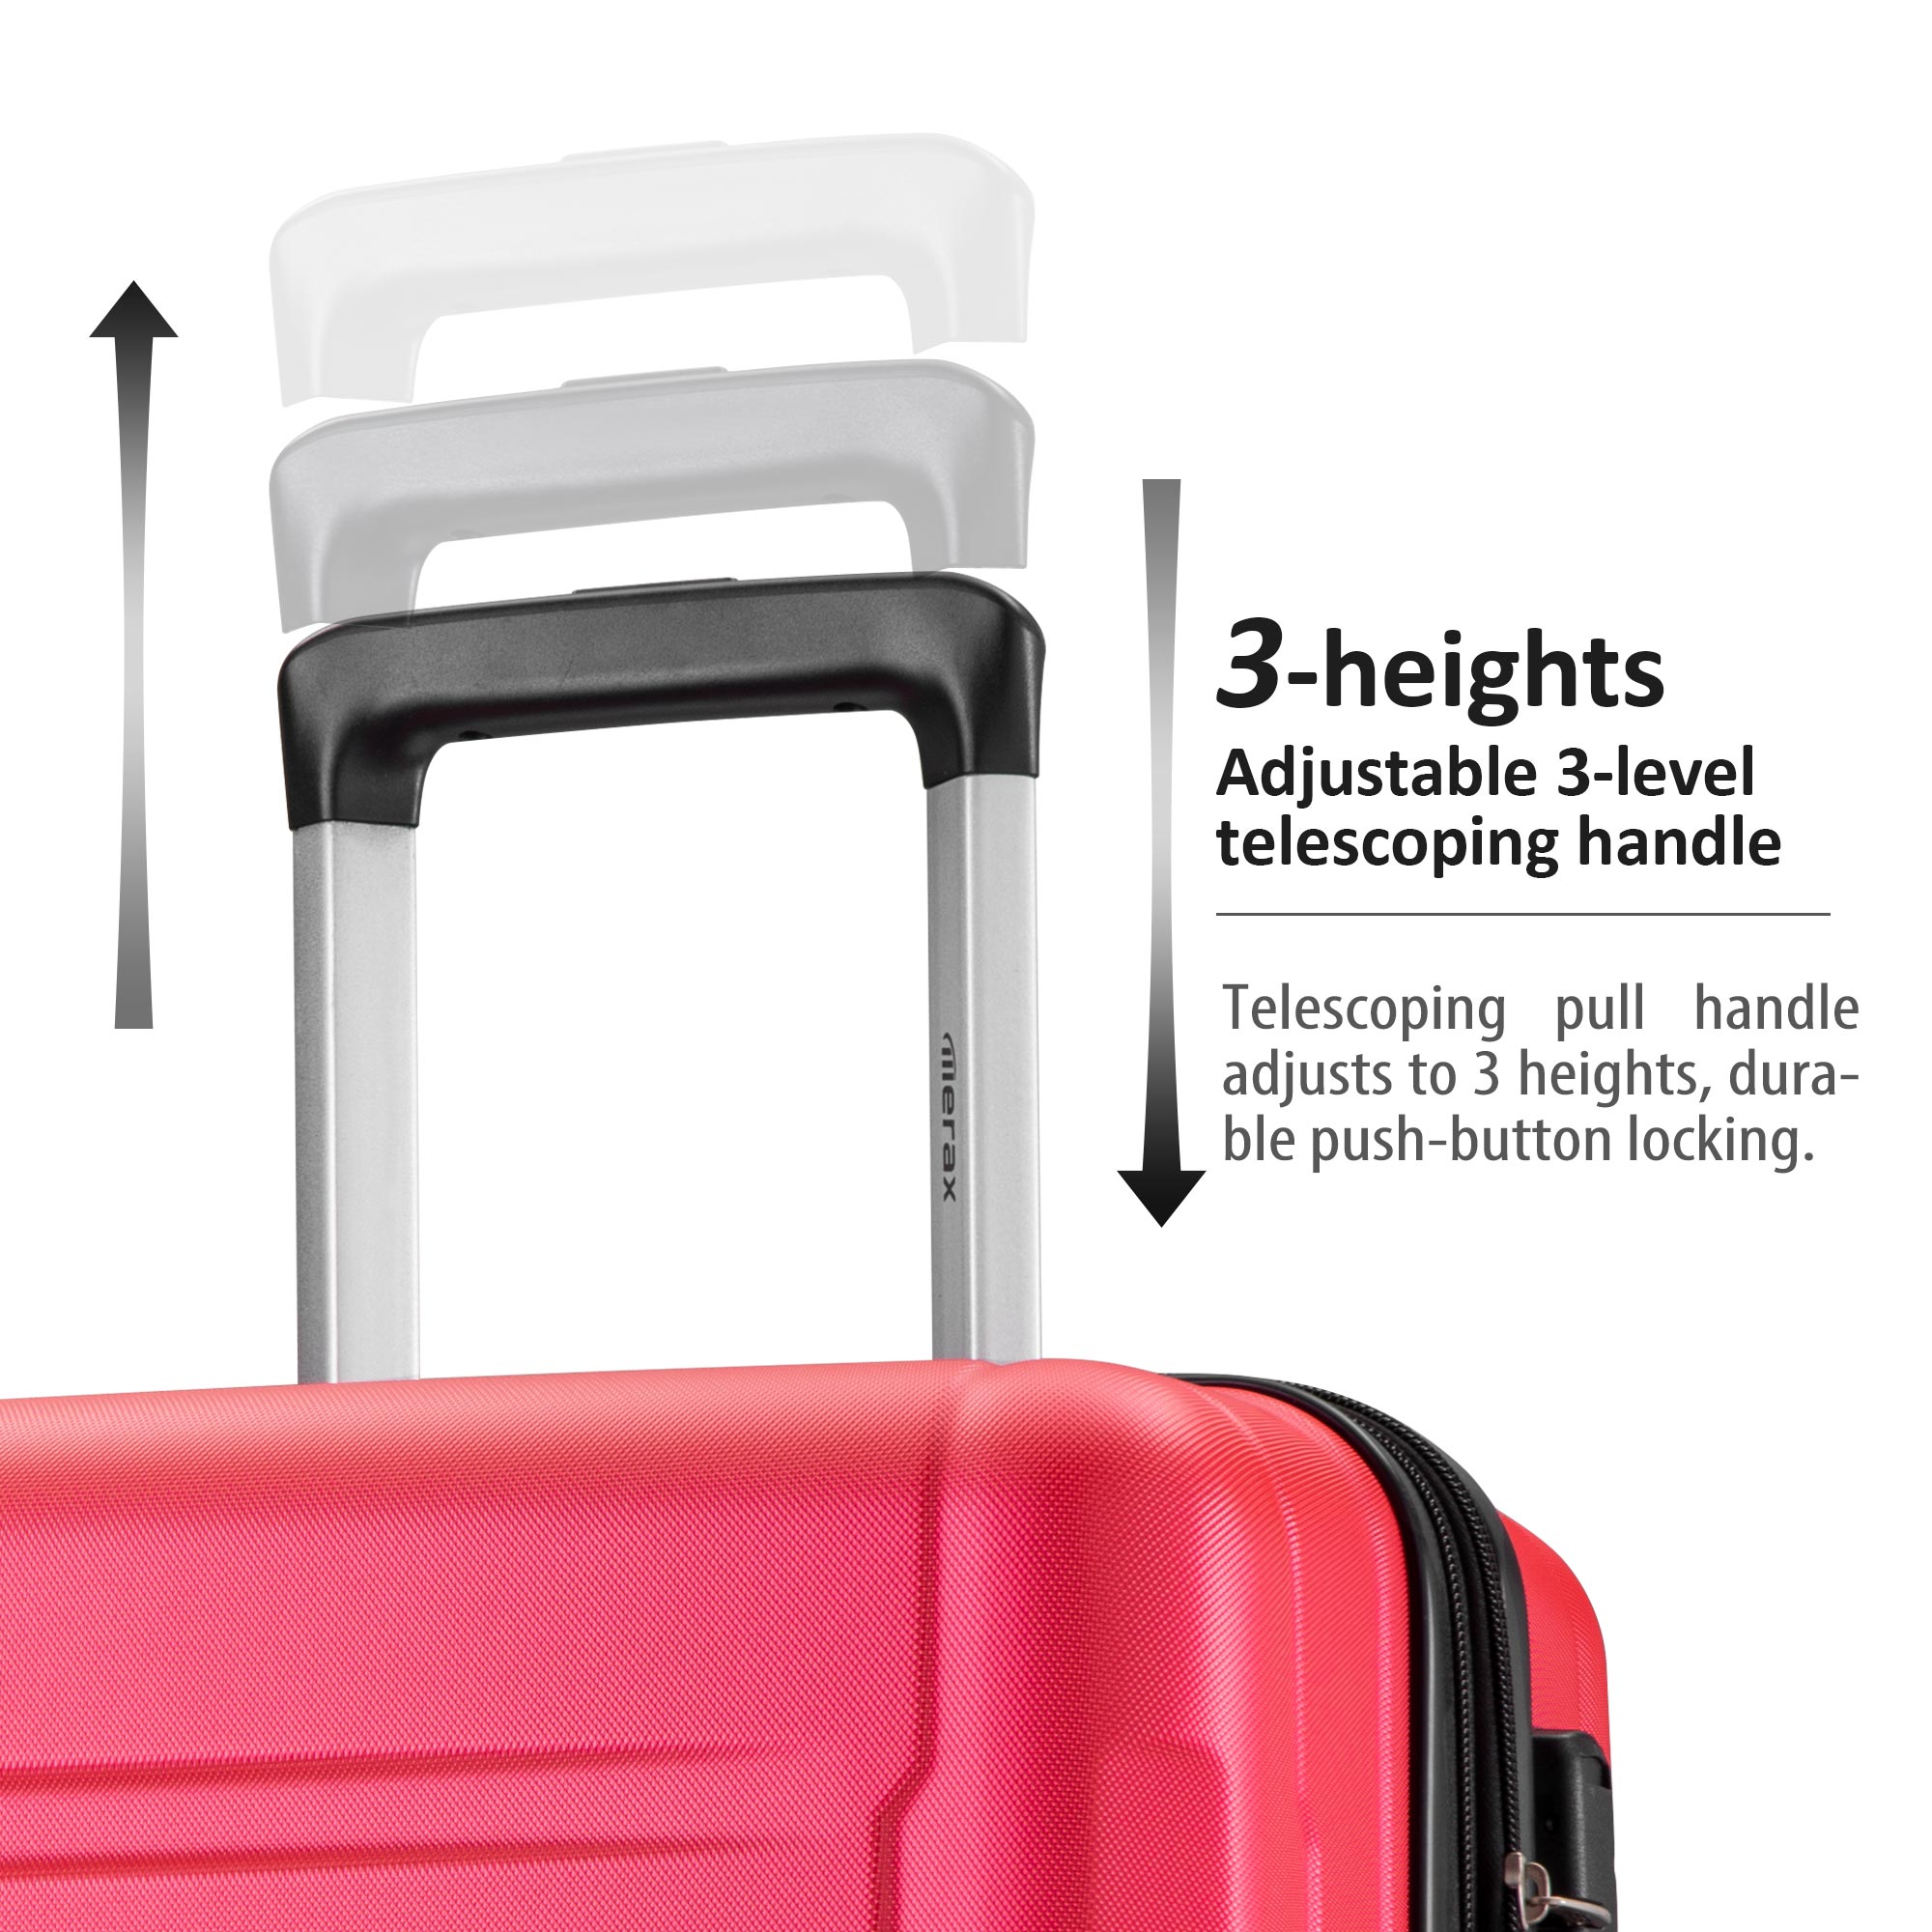 SEGMART Expandable Luggage Sets of 3, 3-Piece Lightweight Hardside 4-Wheel Spinner Luggage Set: 20"/ 24''/ 28" Carry-On Checked Suitcase, Carry on Suitcase with TSA Lock for Traveling, Red, S6564 - image 5 of 8